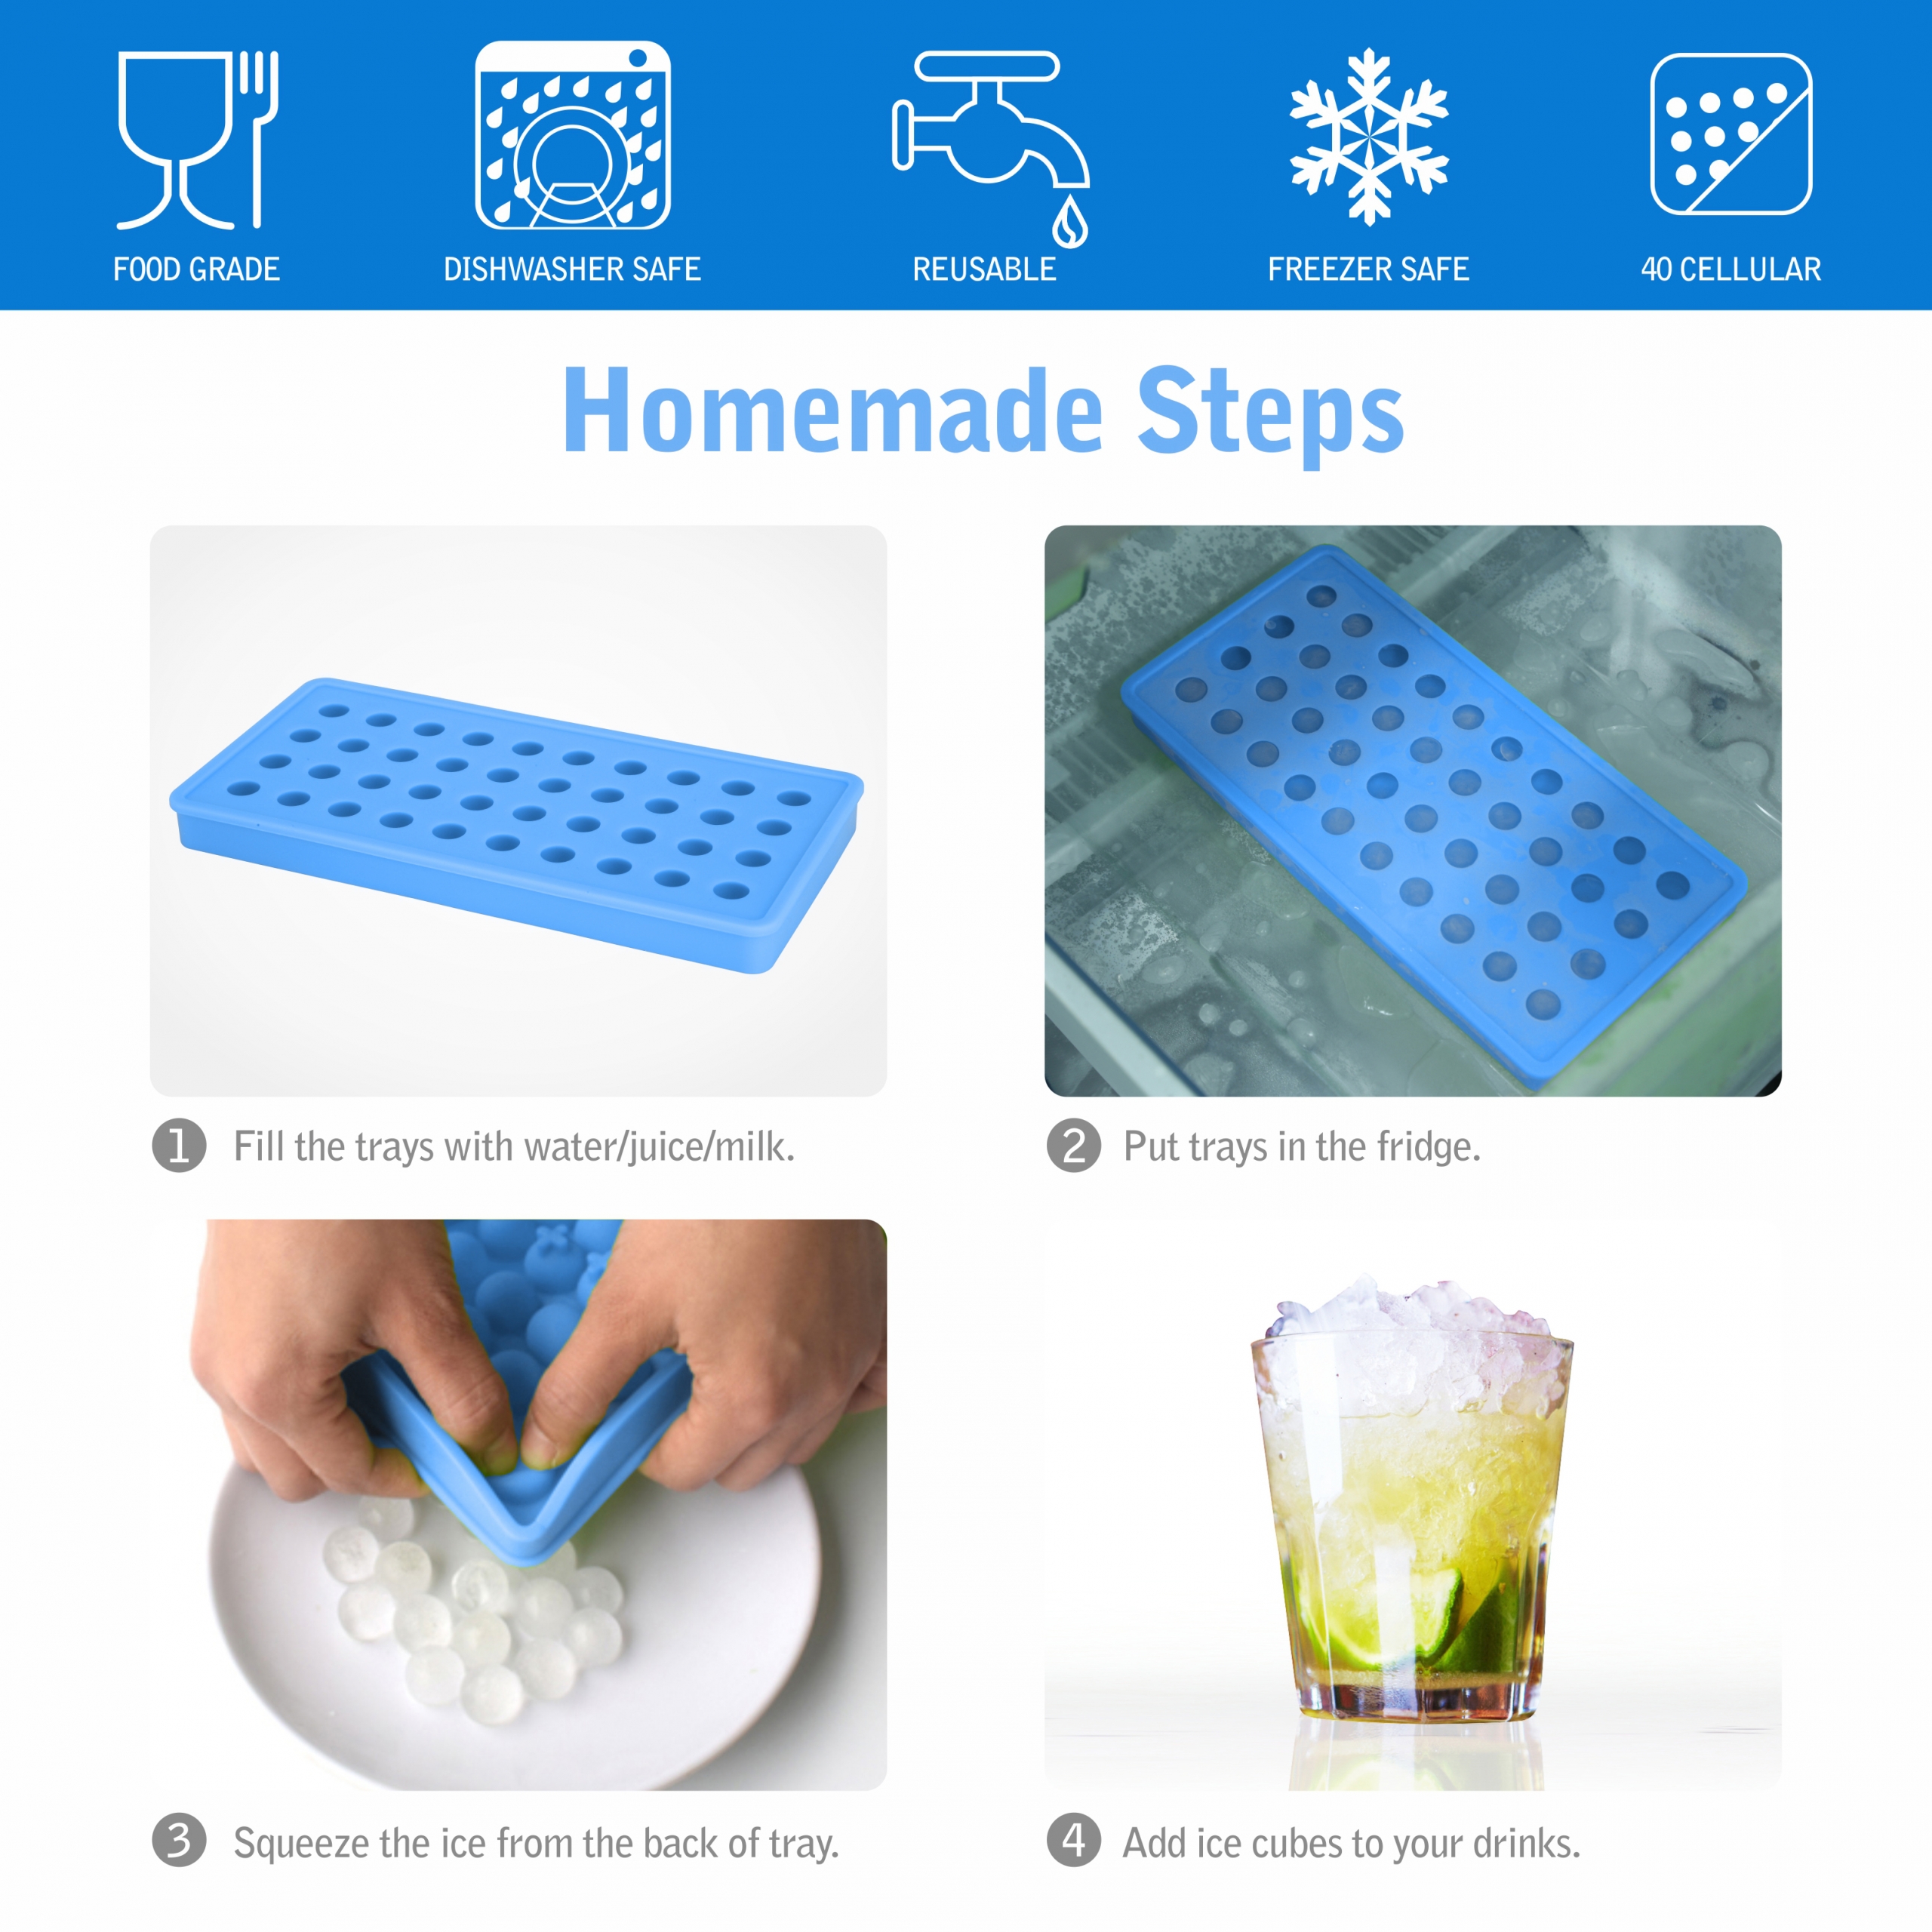 Mini Ice Cube Trays for Freezer with Easy-Release Silicone Bottom